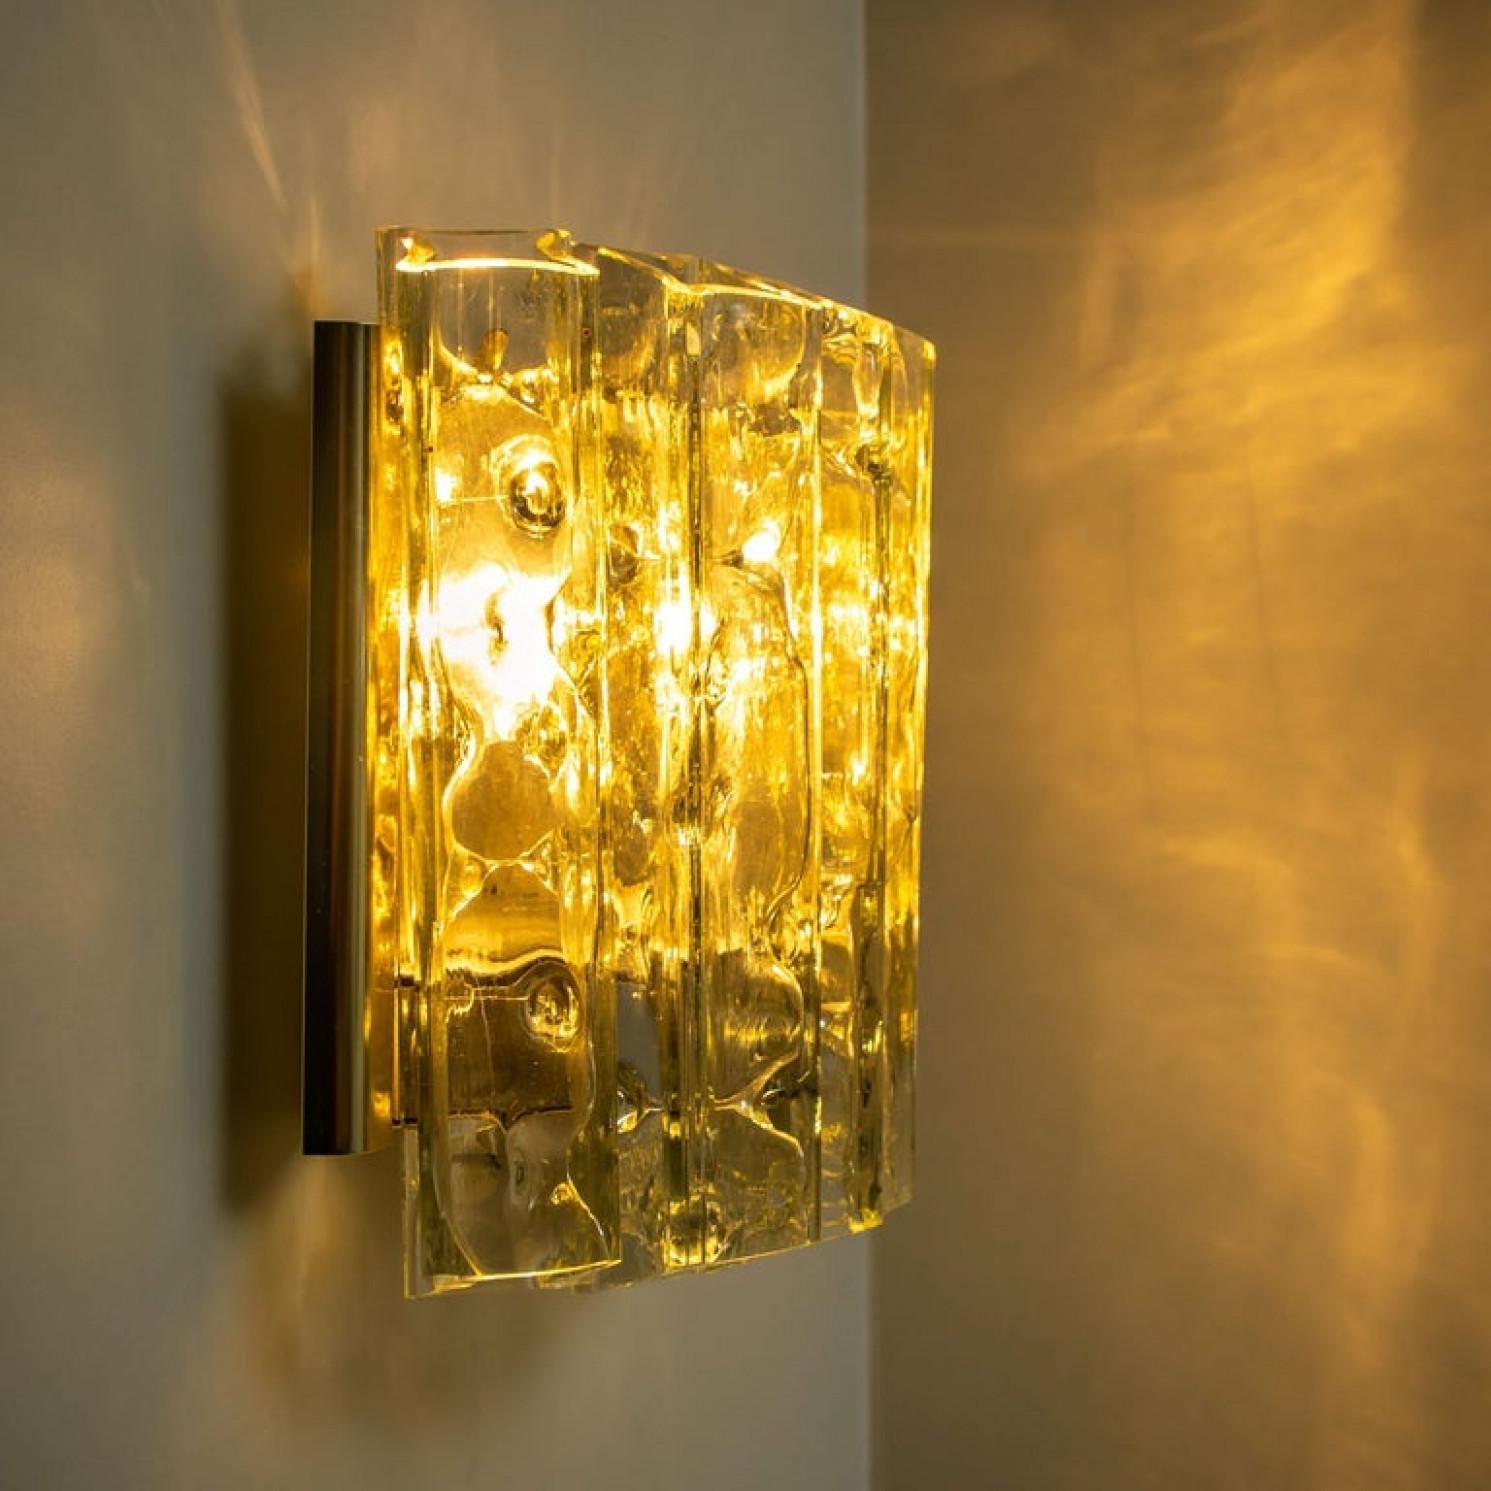 Pair of Midcentury Wall Lamps in Brass and Glass, 1970s For Sale 1